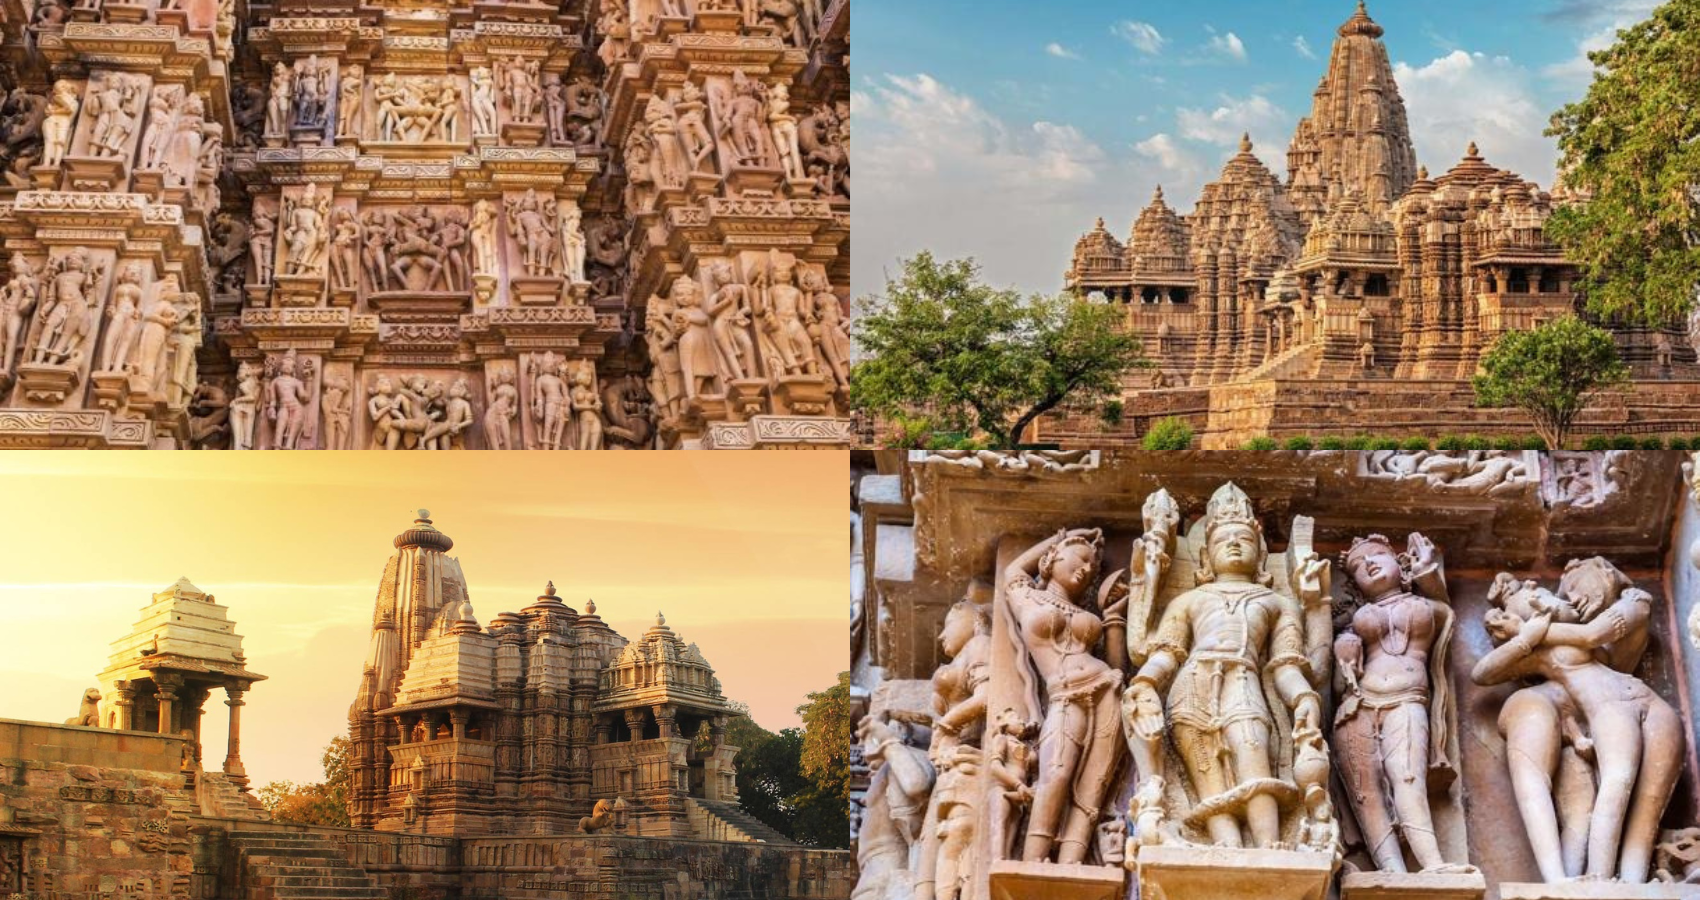 Khajuraho: The Sexiest Temples in India